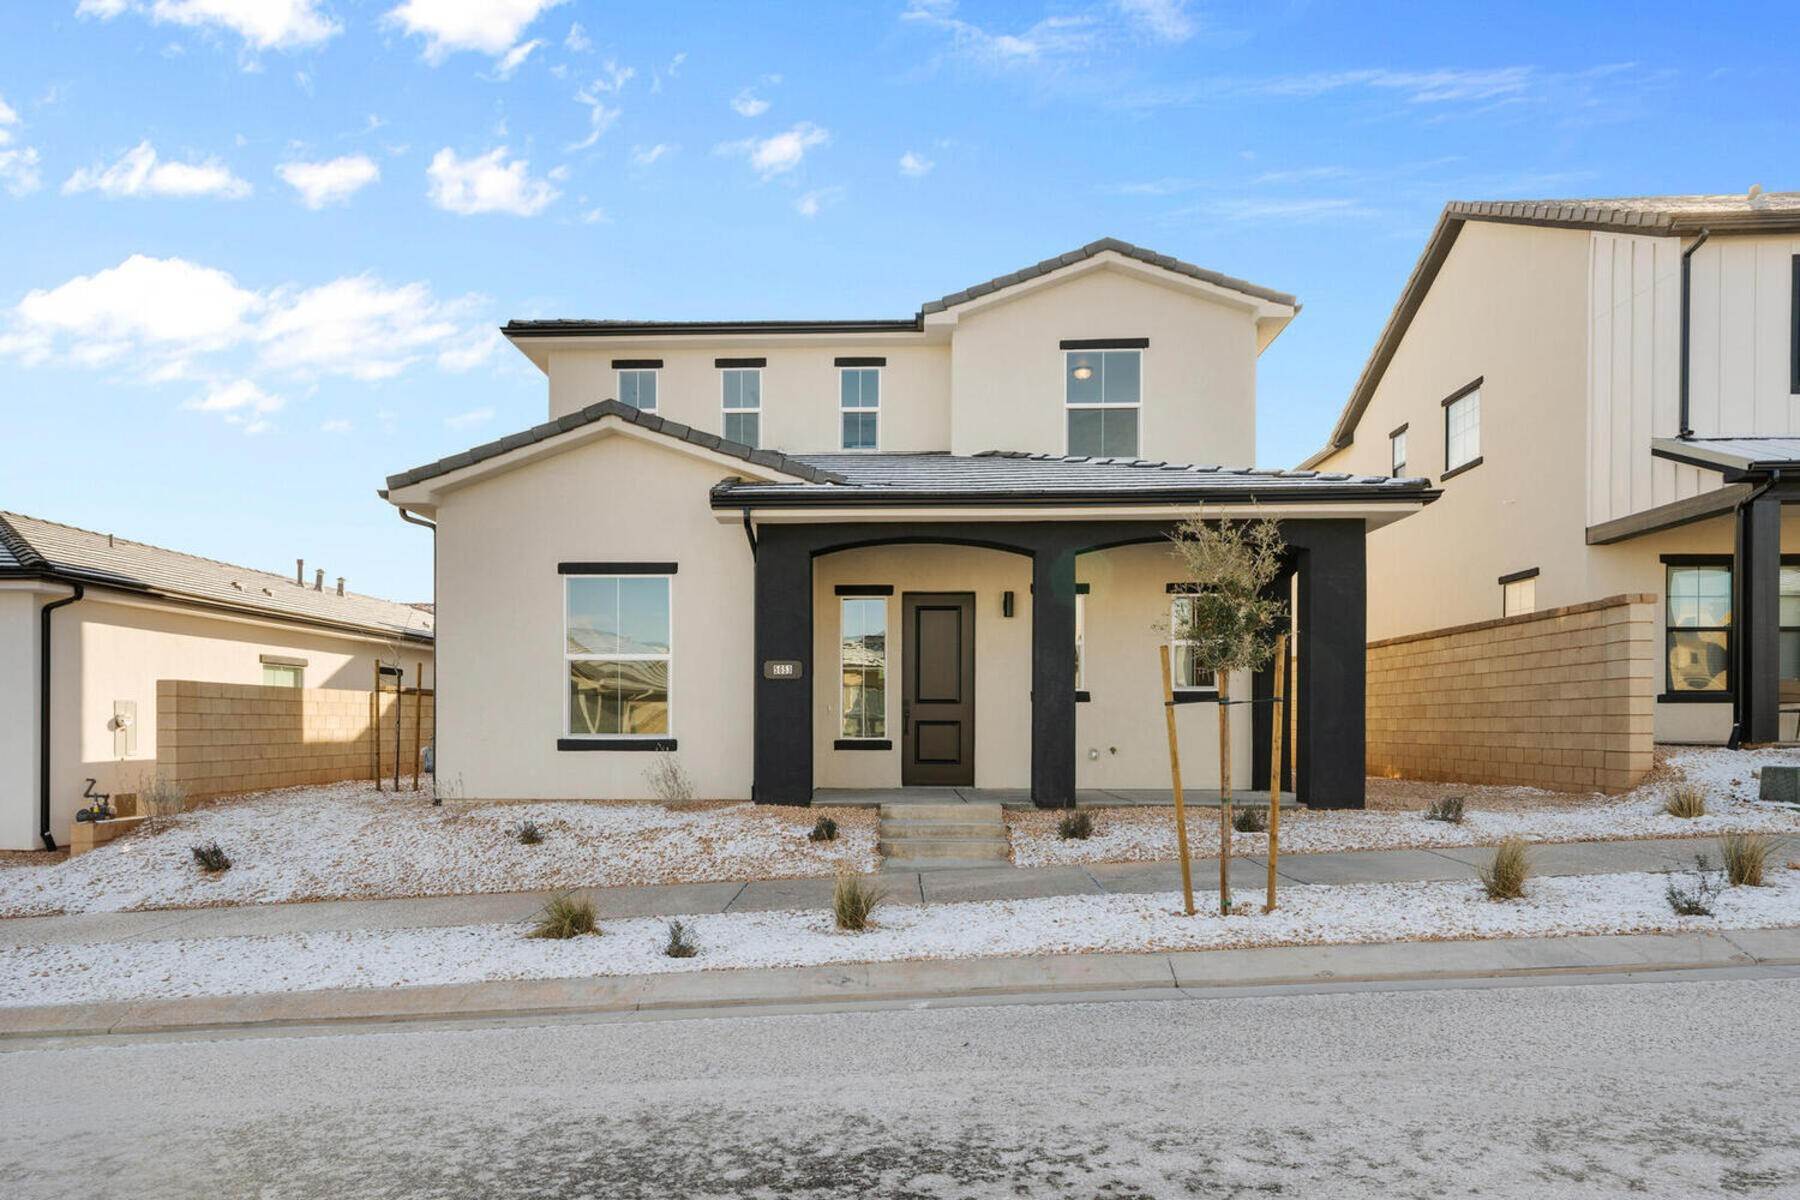 Single Family Homes for Sale at New Southwestern Contemporary Homes with Incredible Amenities in St. George 639 W Juniper Hill Drive, Lot 139 St. George, Utah 84790 United States